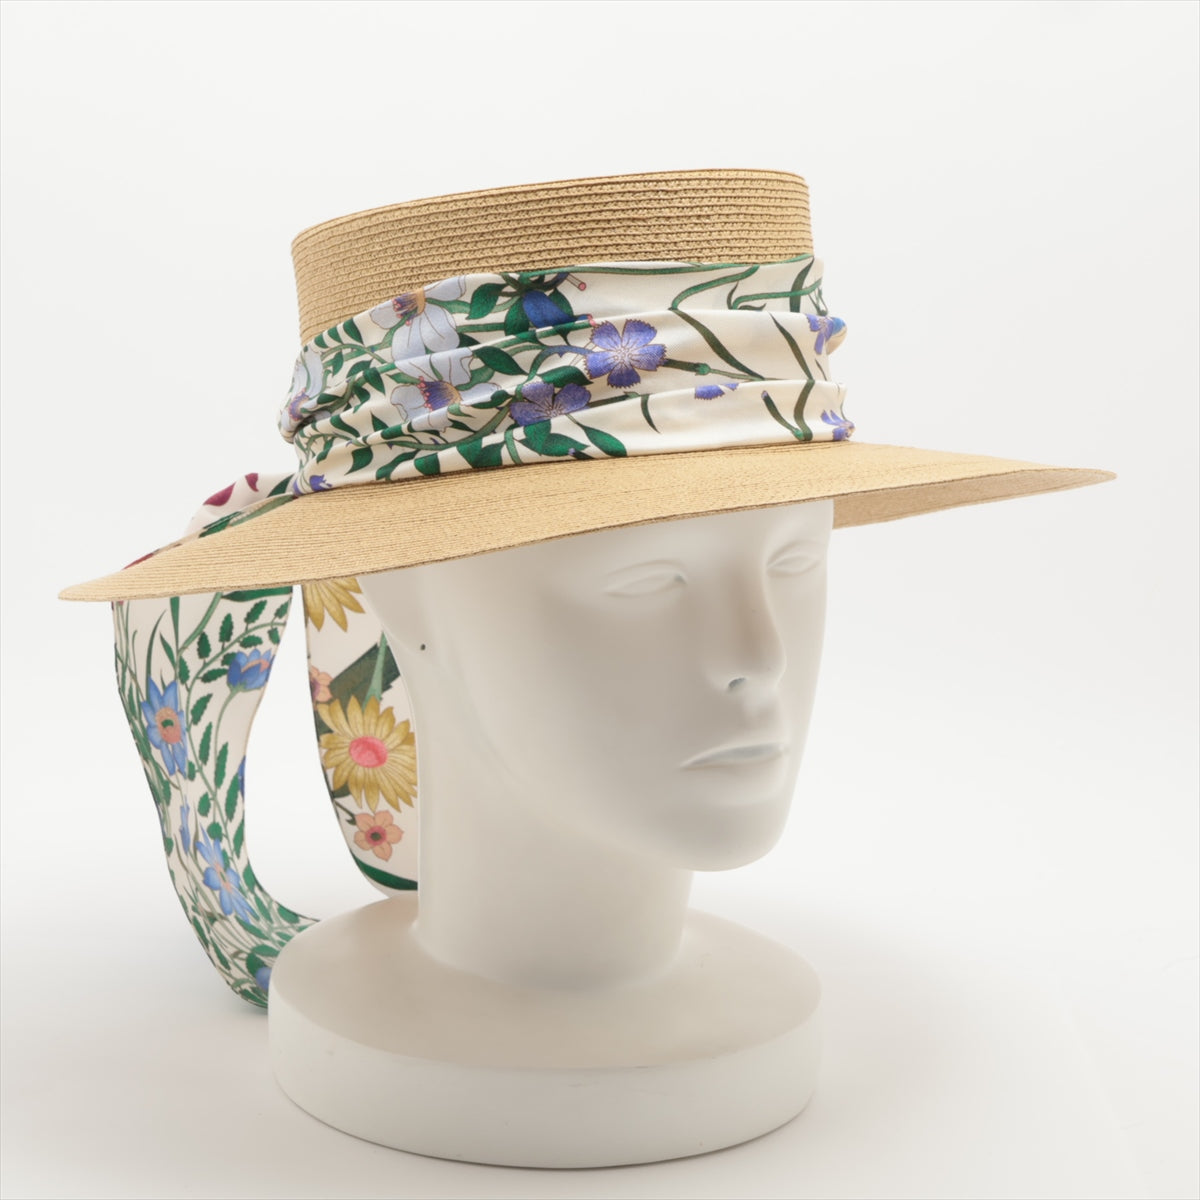 Gucci Flower Hat M/57 Other Natural 454667 pulp Cancan hat  Straw hat Scarf